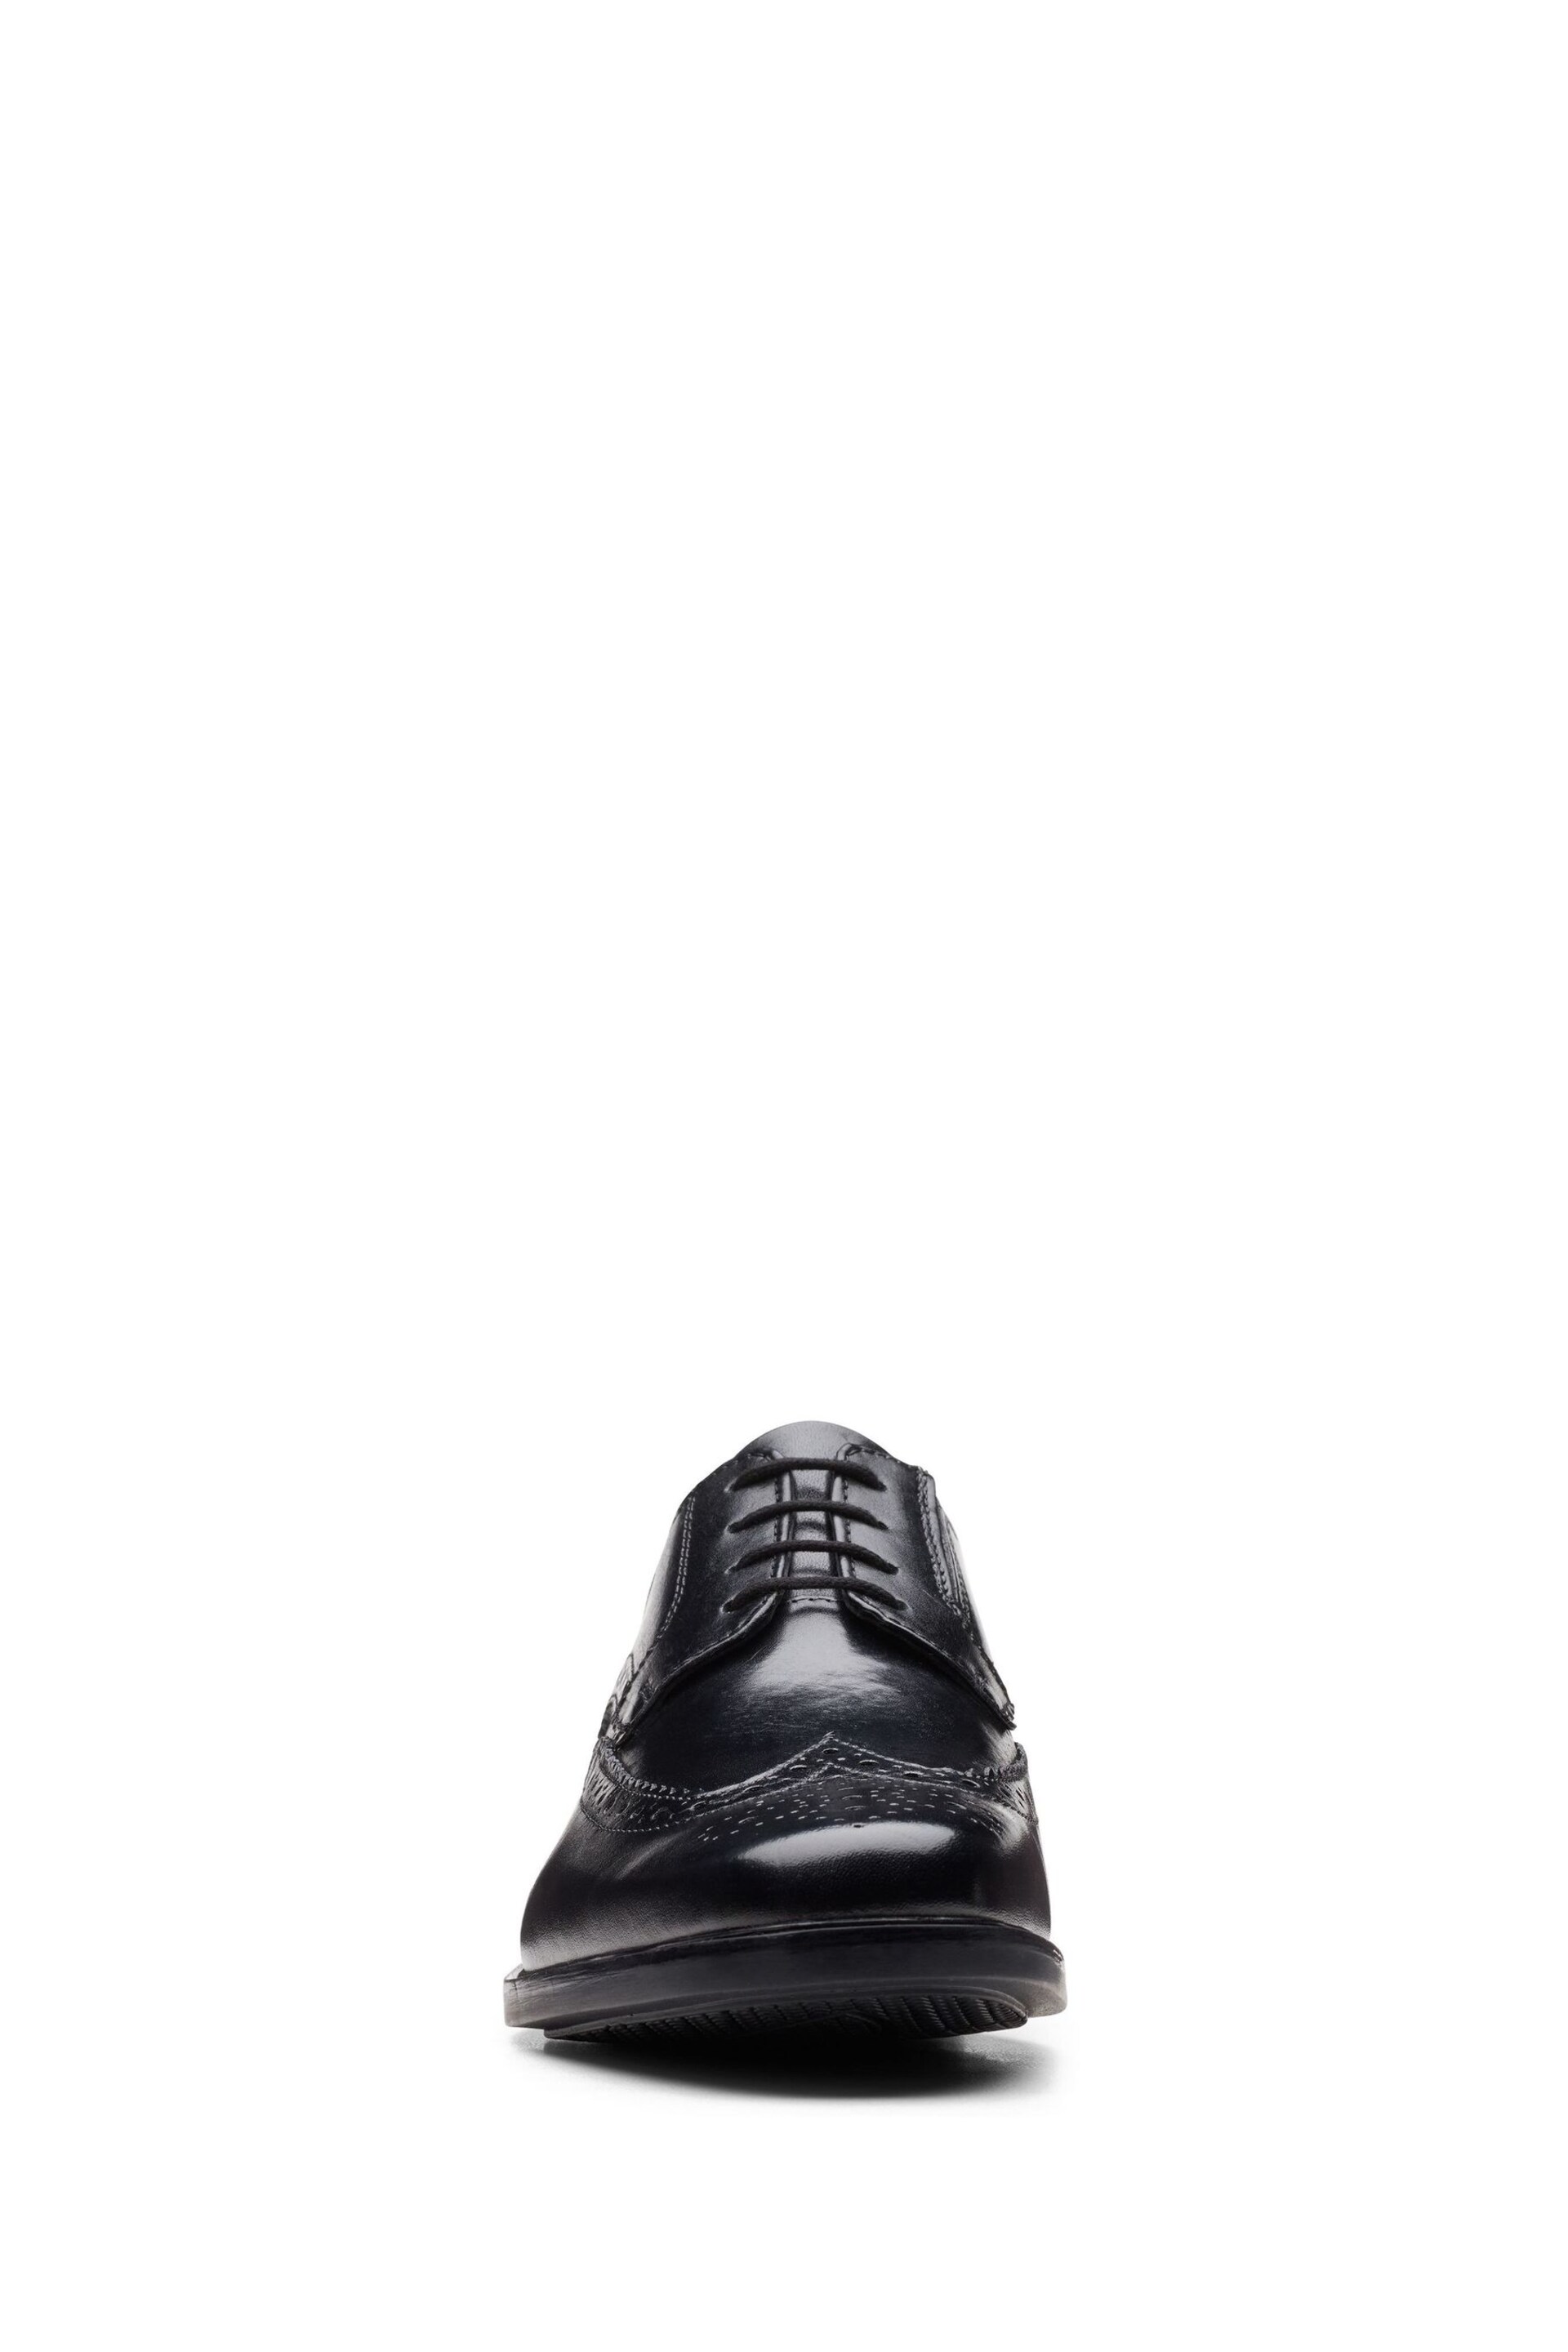 Clarks Black Leather Howard Wing Wide Fit Shoes - Image 2 of 7